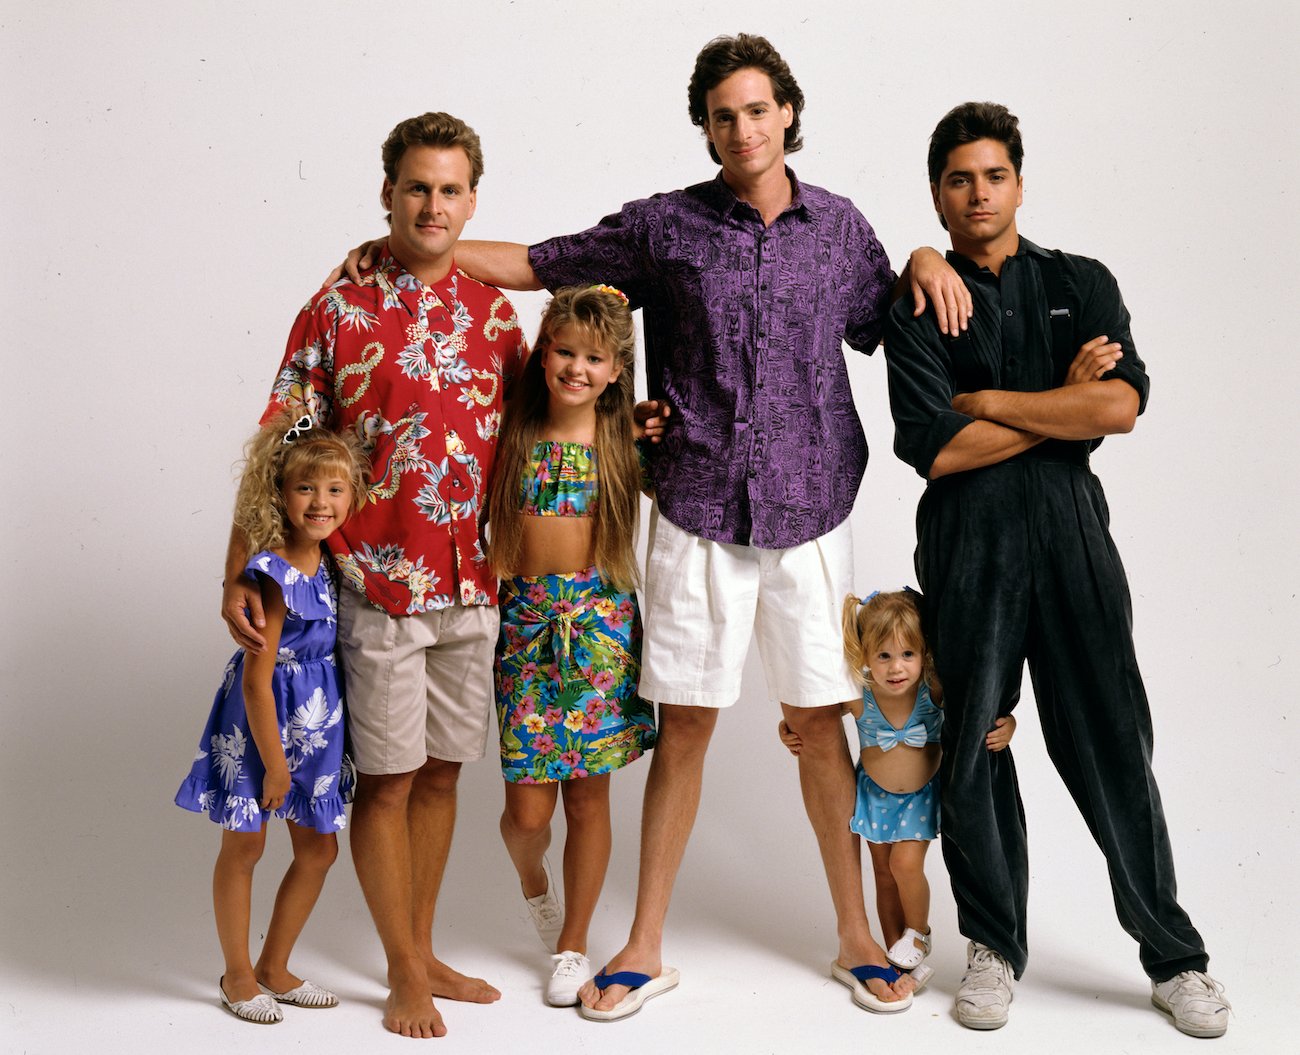 The cast of 'Full House' including Stephanie (Jodie Sweetin), Joey (Dave Coulier), D.J. (Candace Cameron), Danny (Bob Saget), Michelle (Mary Kate/Ashley Olsen) and Jesse (John Stamos)